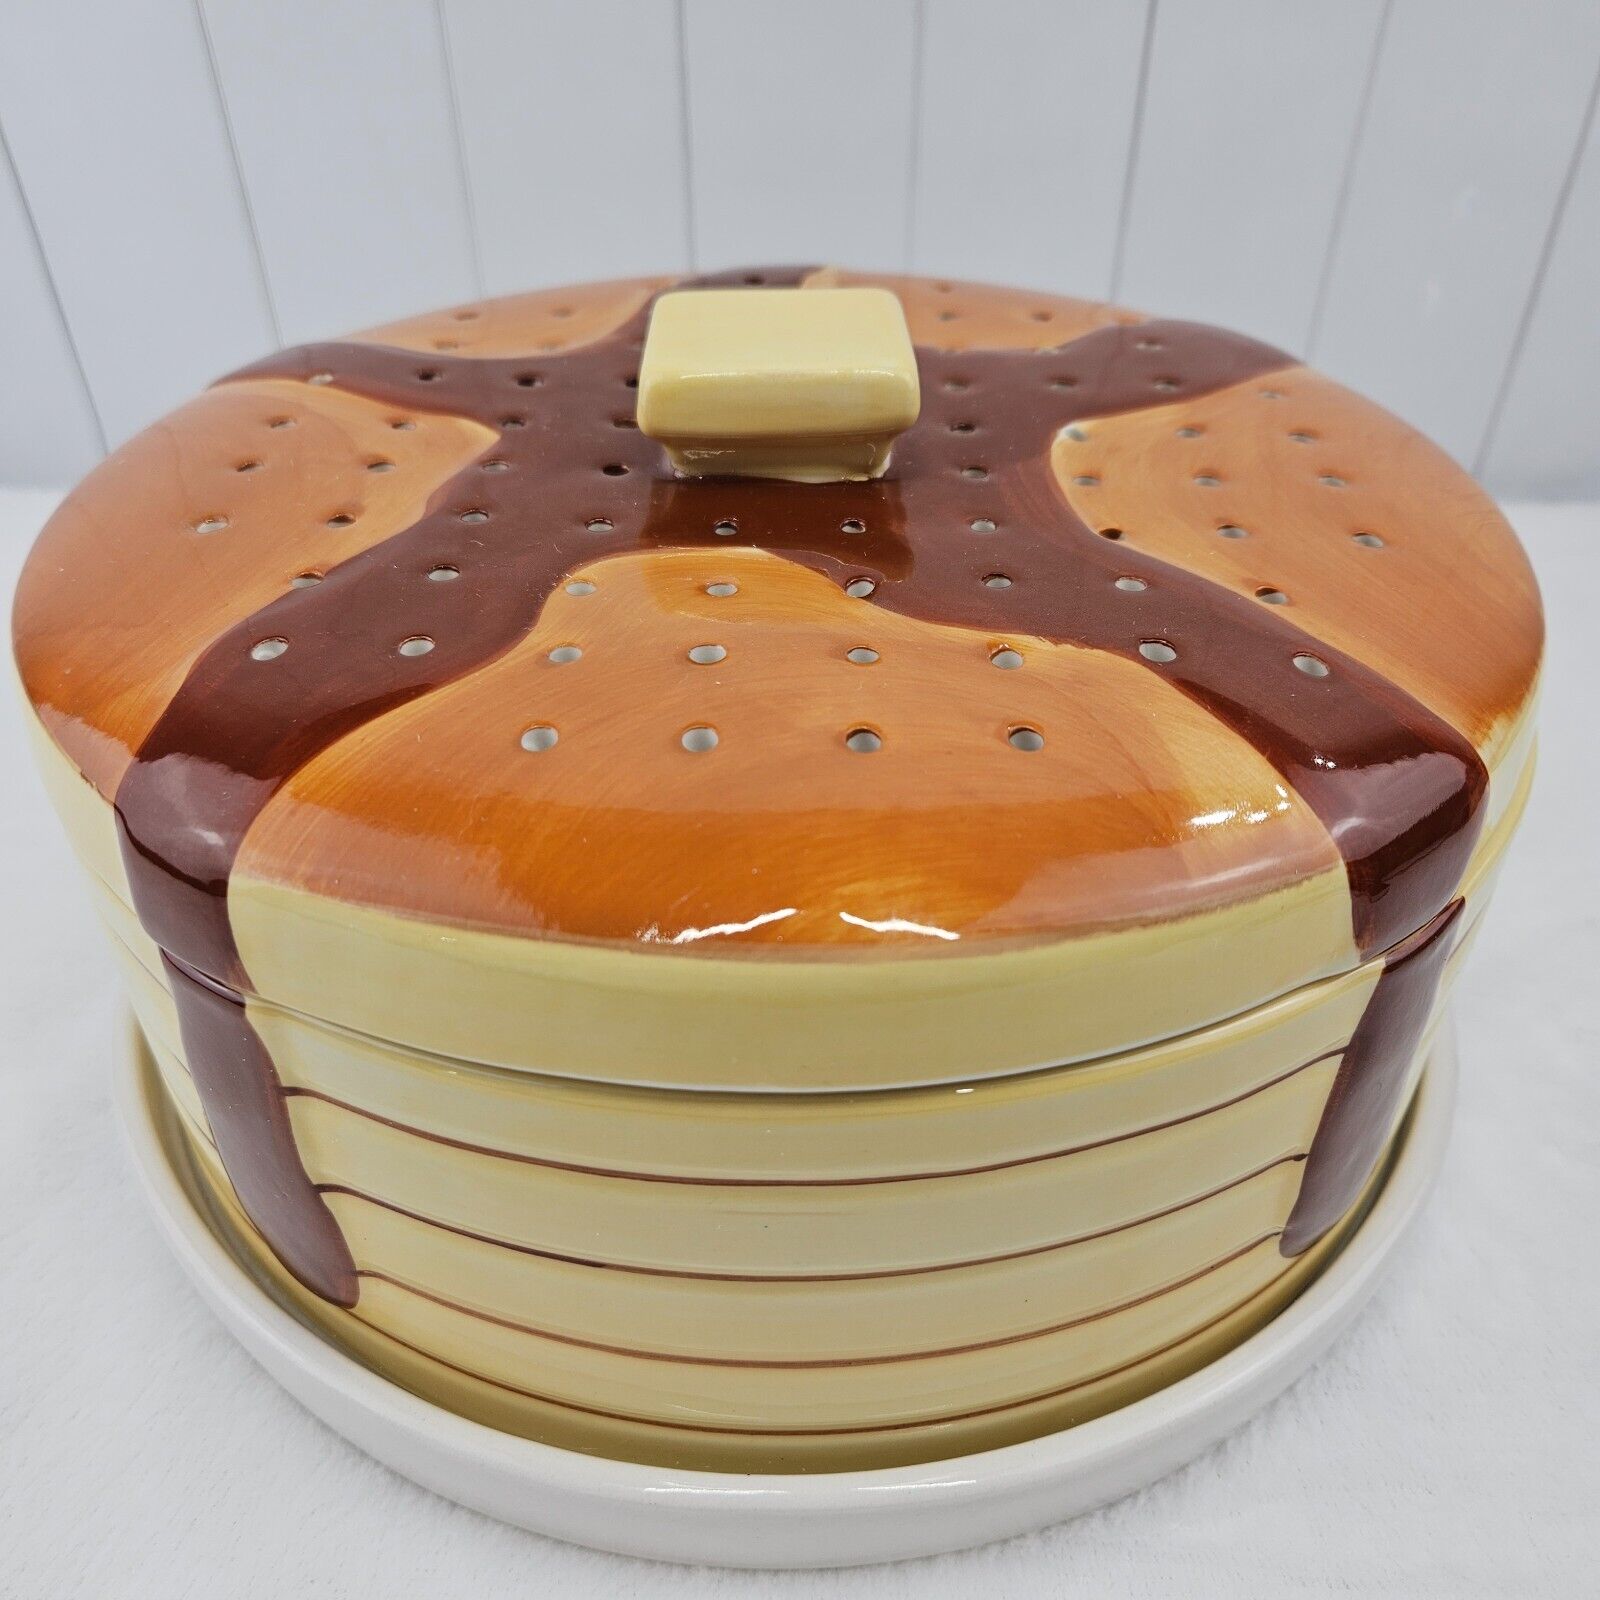 Pancake Warmer Ceramic Stack Of Pancakes With Butter Handle And Syrup Vintage 